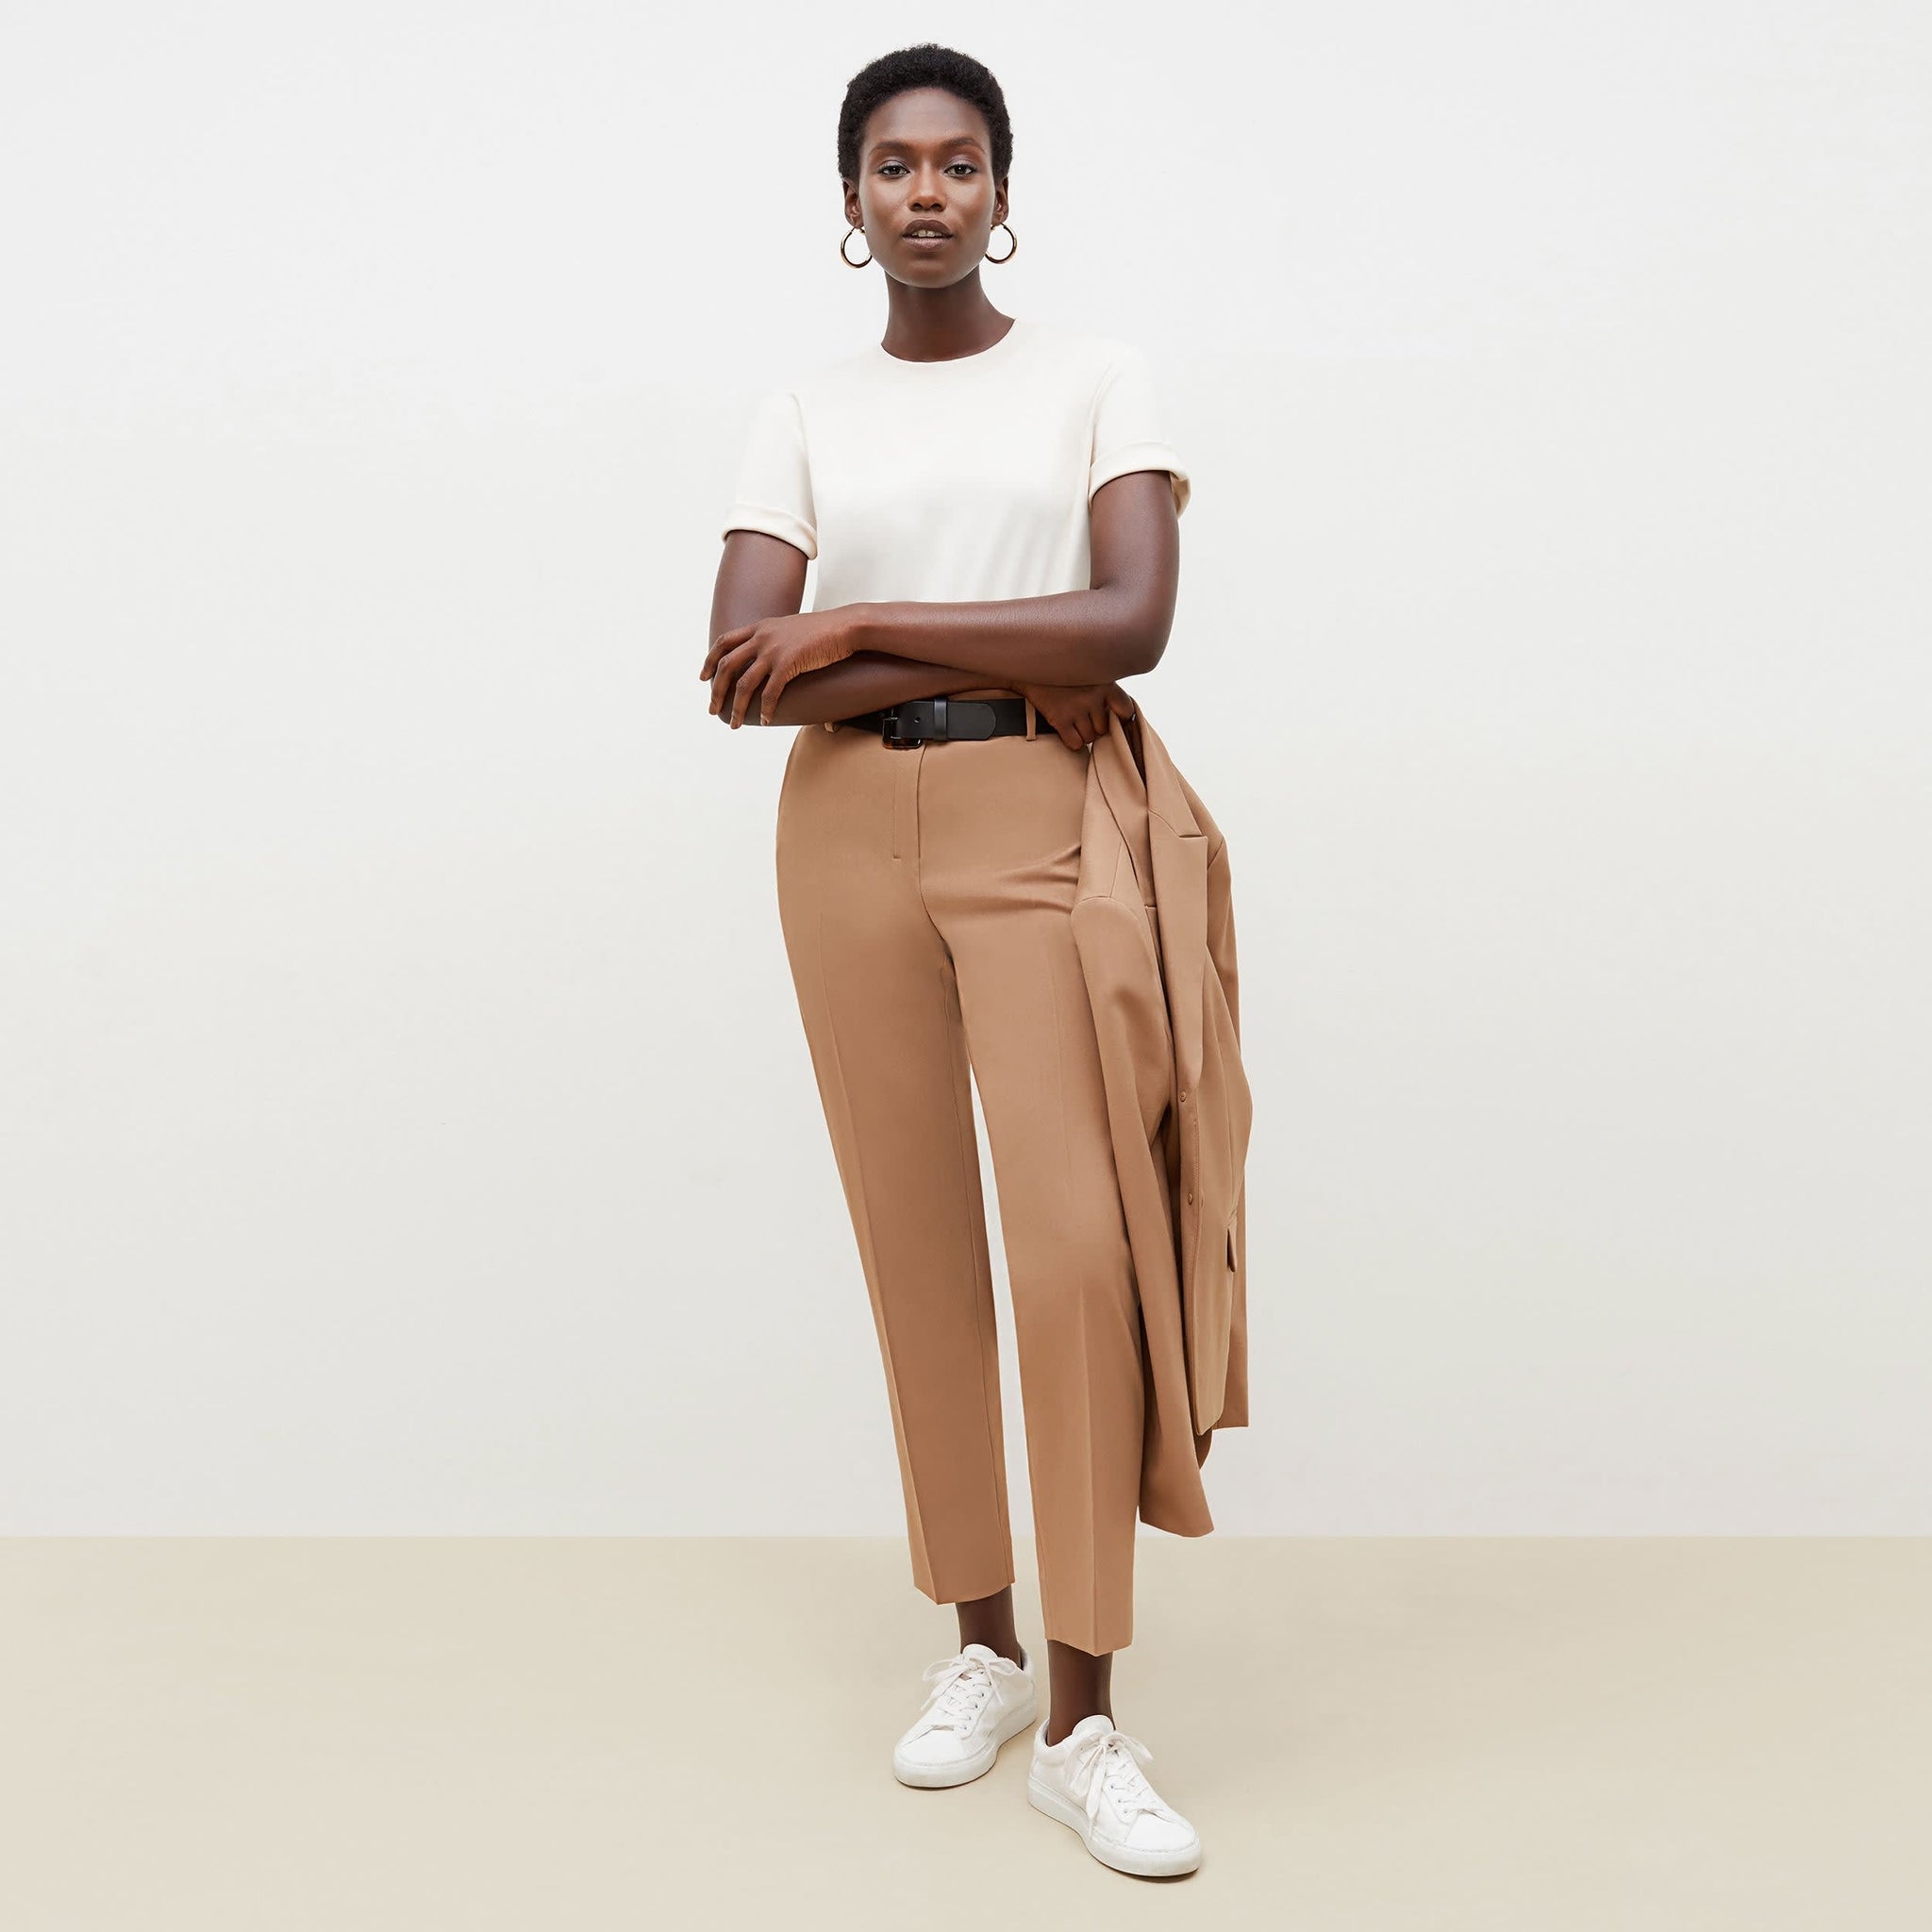 Paul Smith Tapered Fit Pleated Trousers - Camel - M2R-741X-K21216